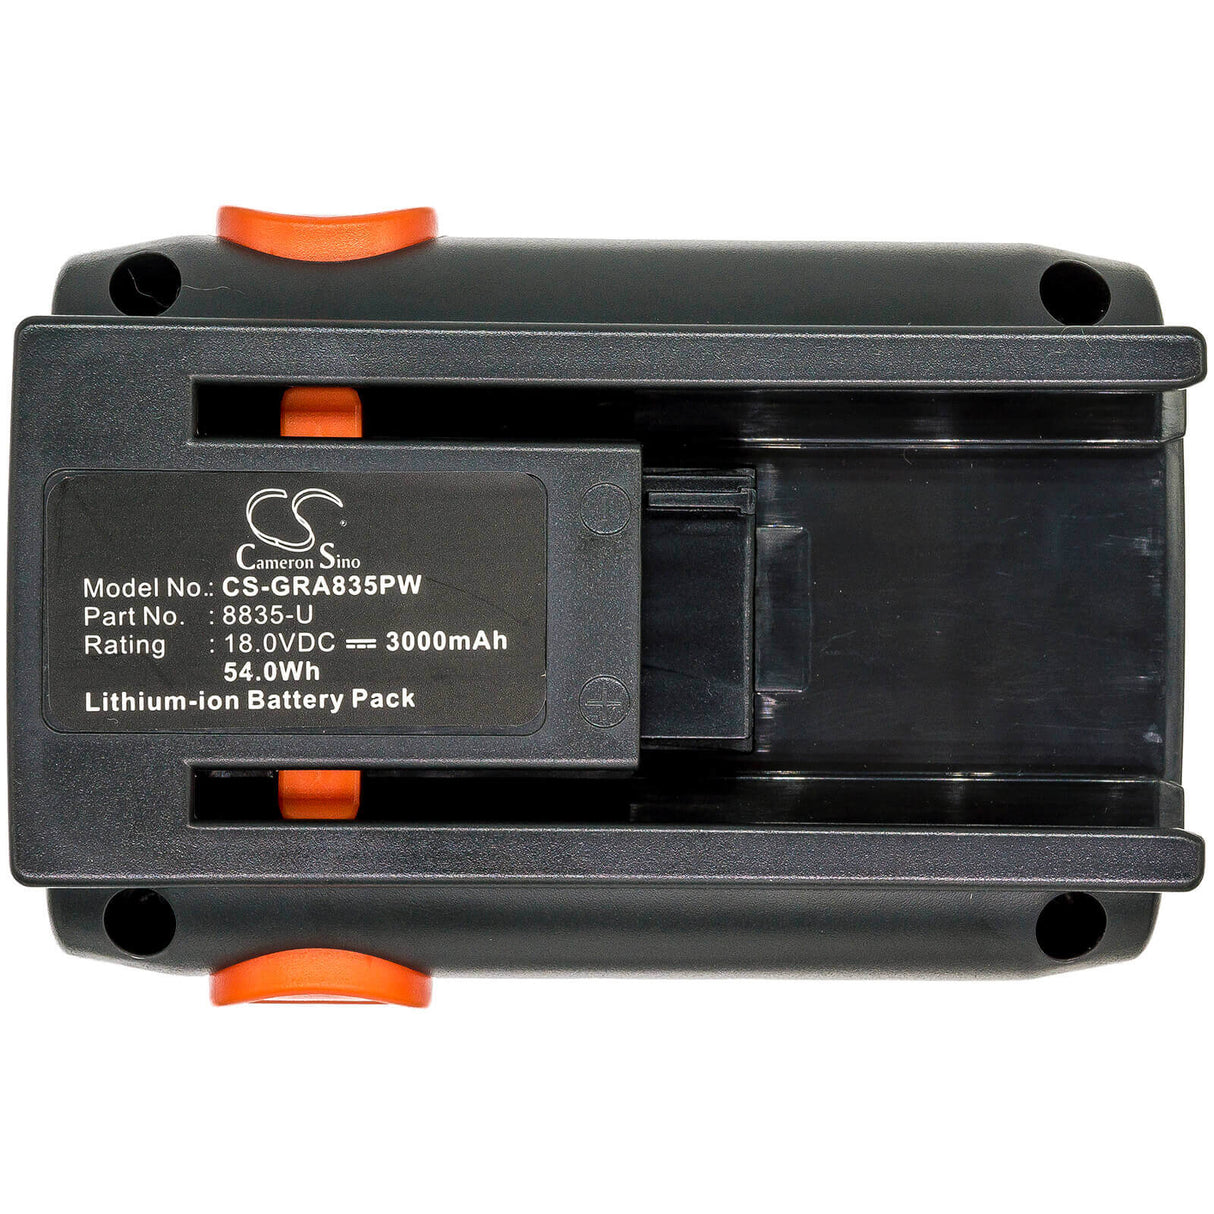 Battery For Gardena 8841, 8840, Accucut Li 400 18.0v, 3000mah - 54.00wh Batteries for Electronics Cameron Sino Technology Limited   